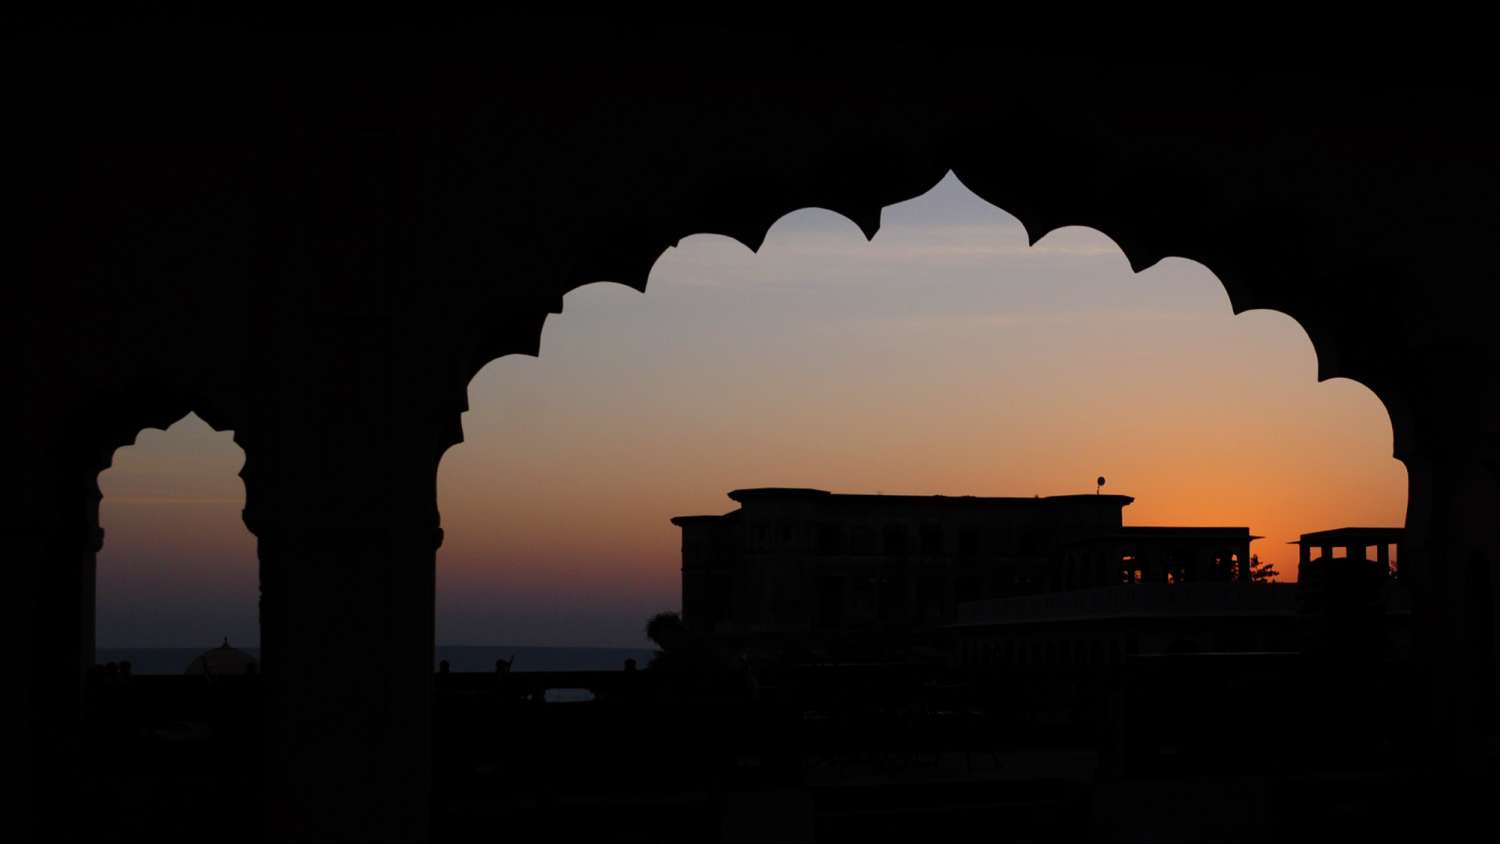 gwalior fort wallpaper gallery,sky,light,cloud,architecture,silhouette